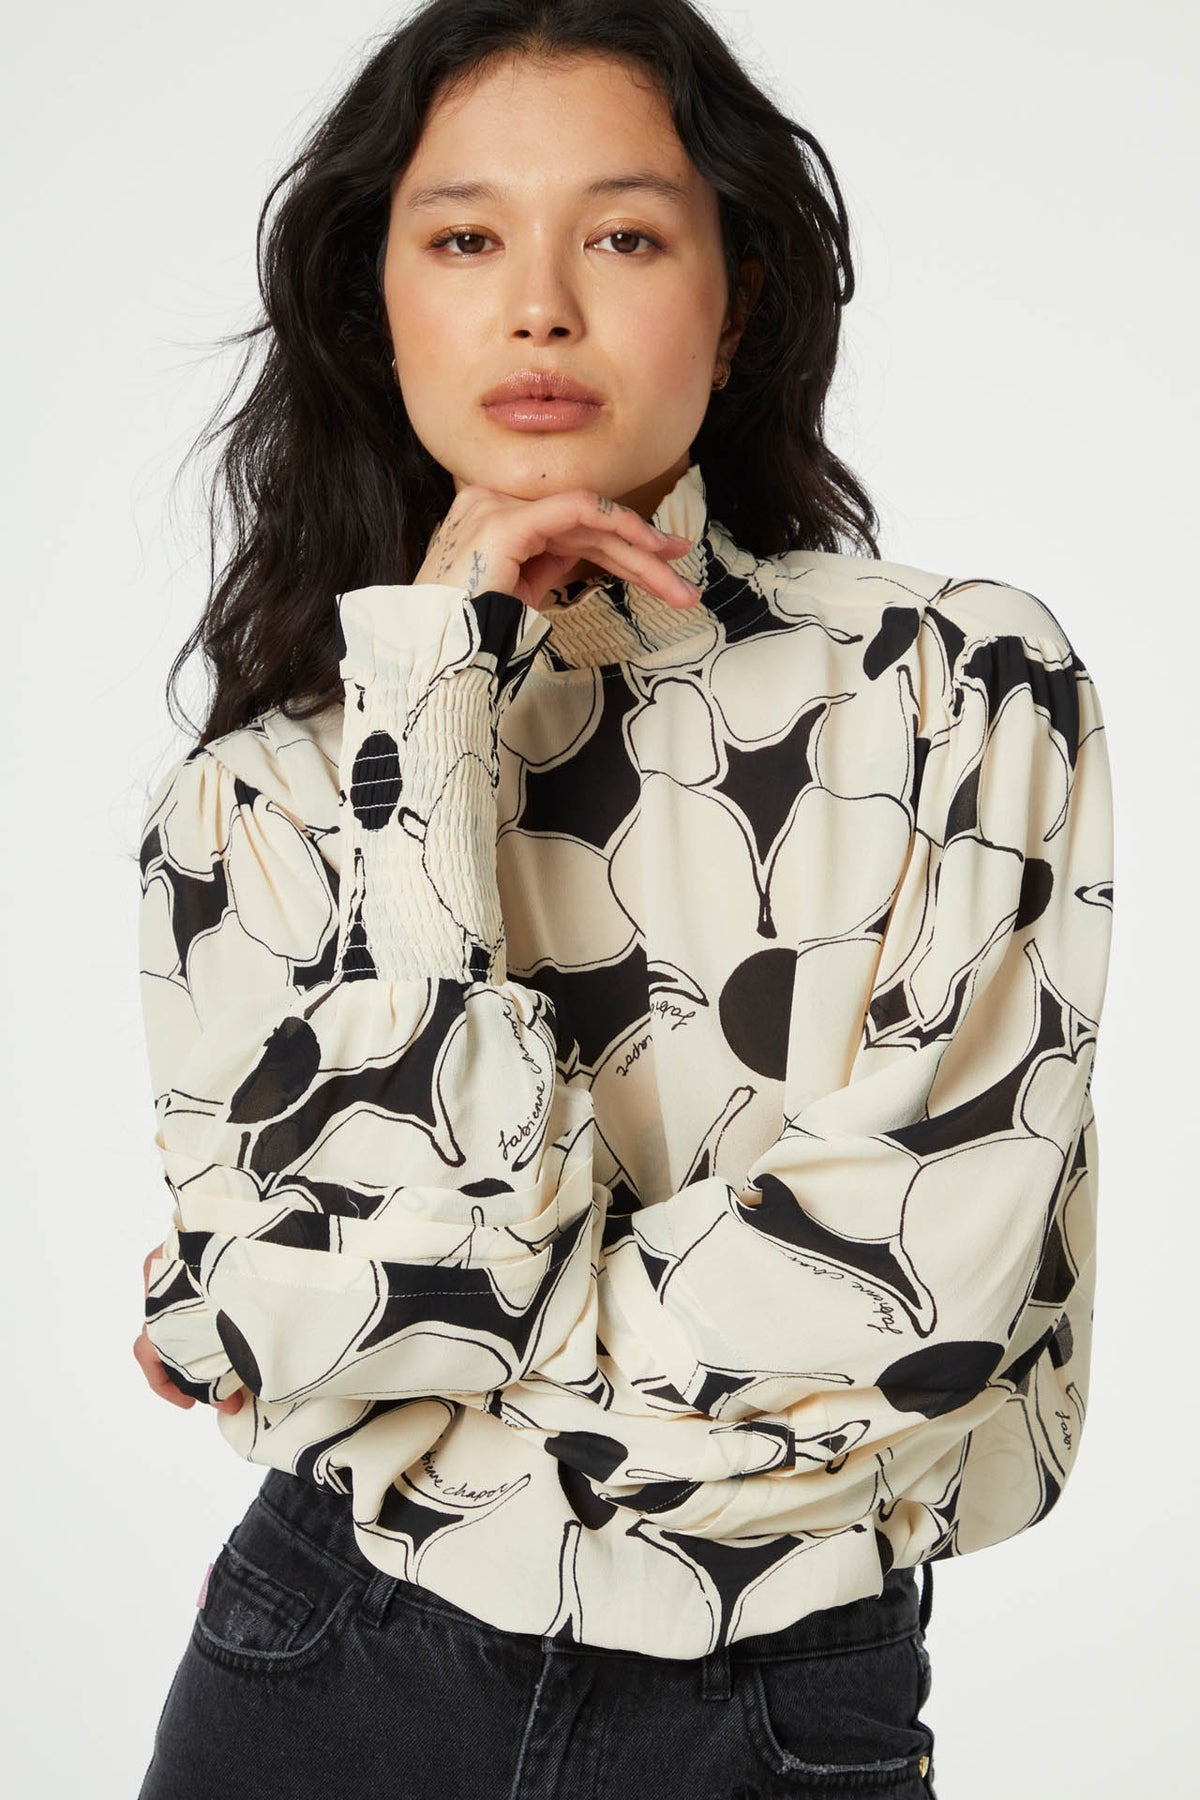 Pull on monochrome top with floral print and high neck with long sleeves